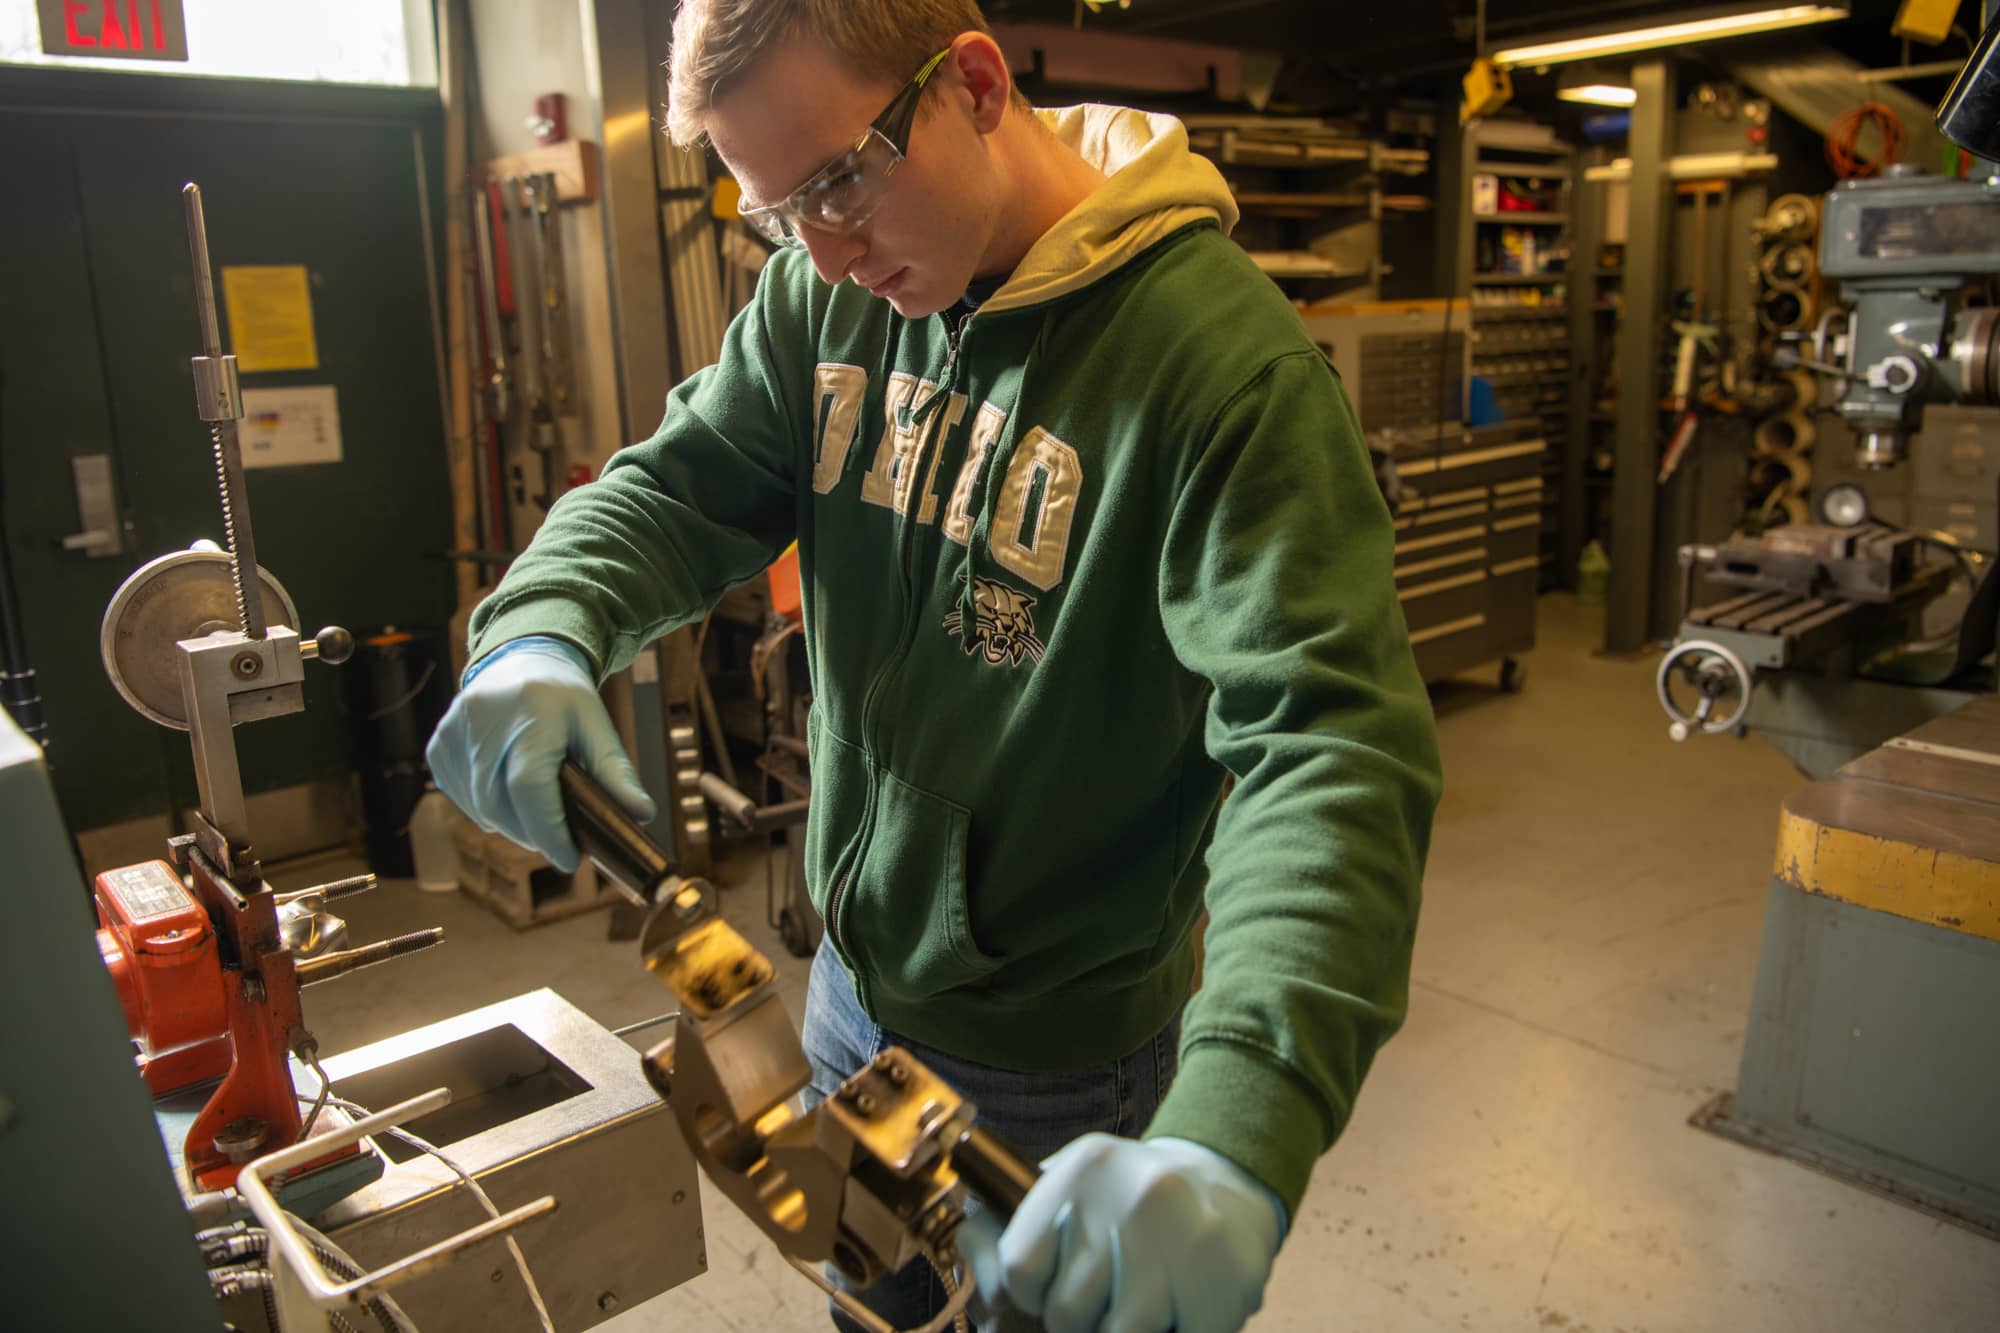 An undergraduate engineering student researches new sustainable construction materials in the Institute for Sustainable Energy and the Environment in the Russ College of Engineering and Technology.